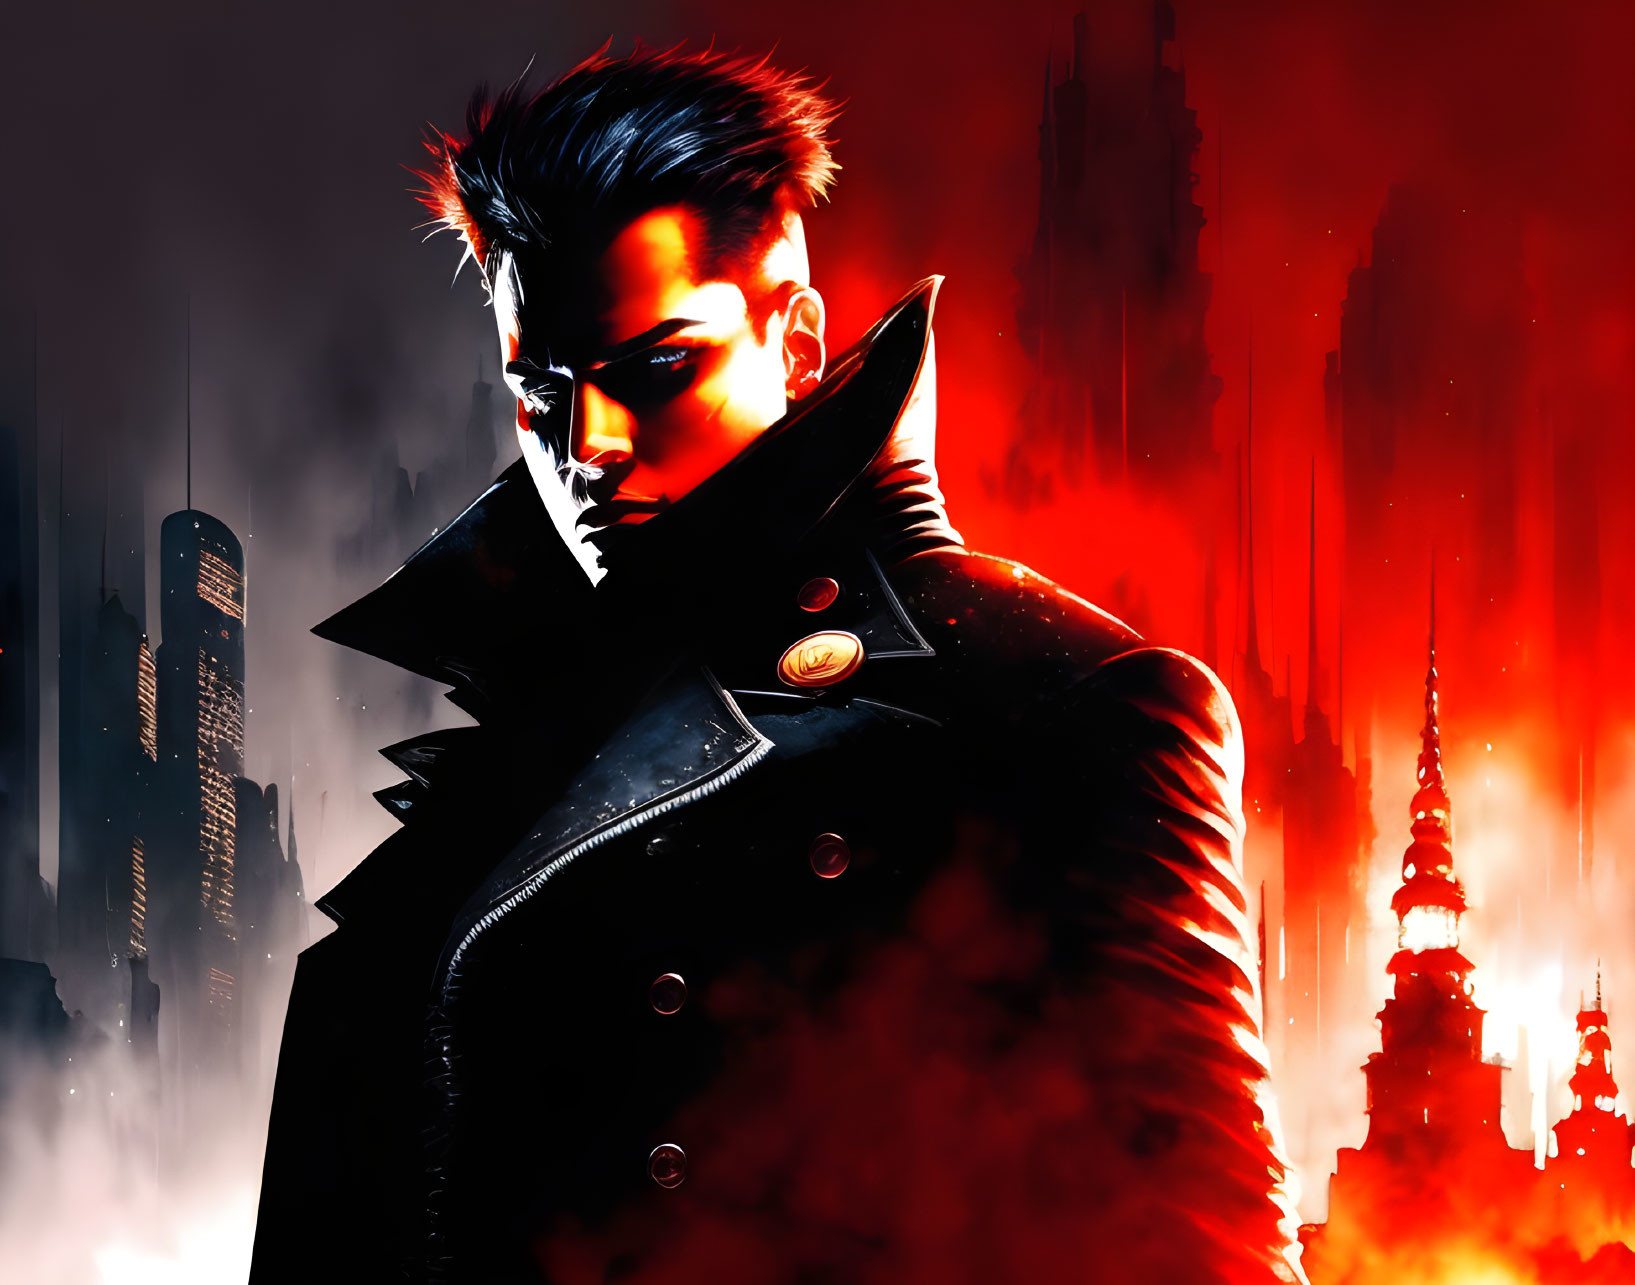 Dark, brooding superhero with spiky hair in fiery cityscape.